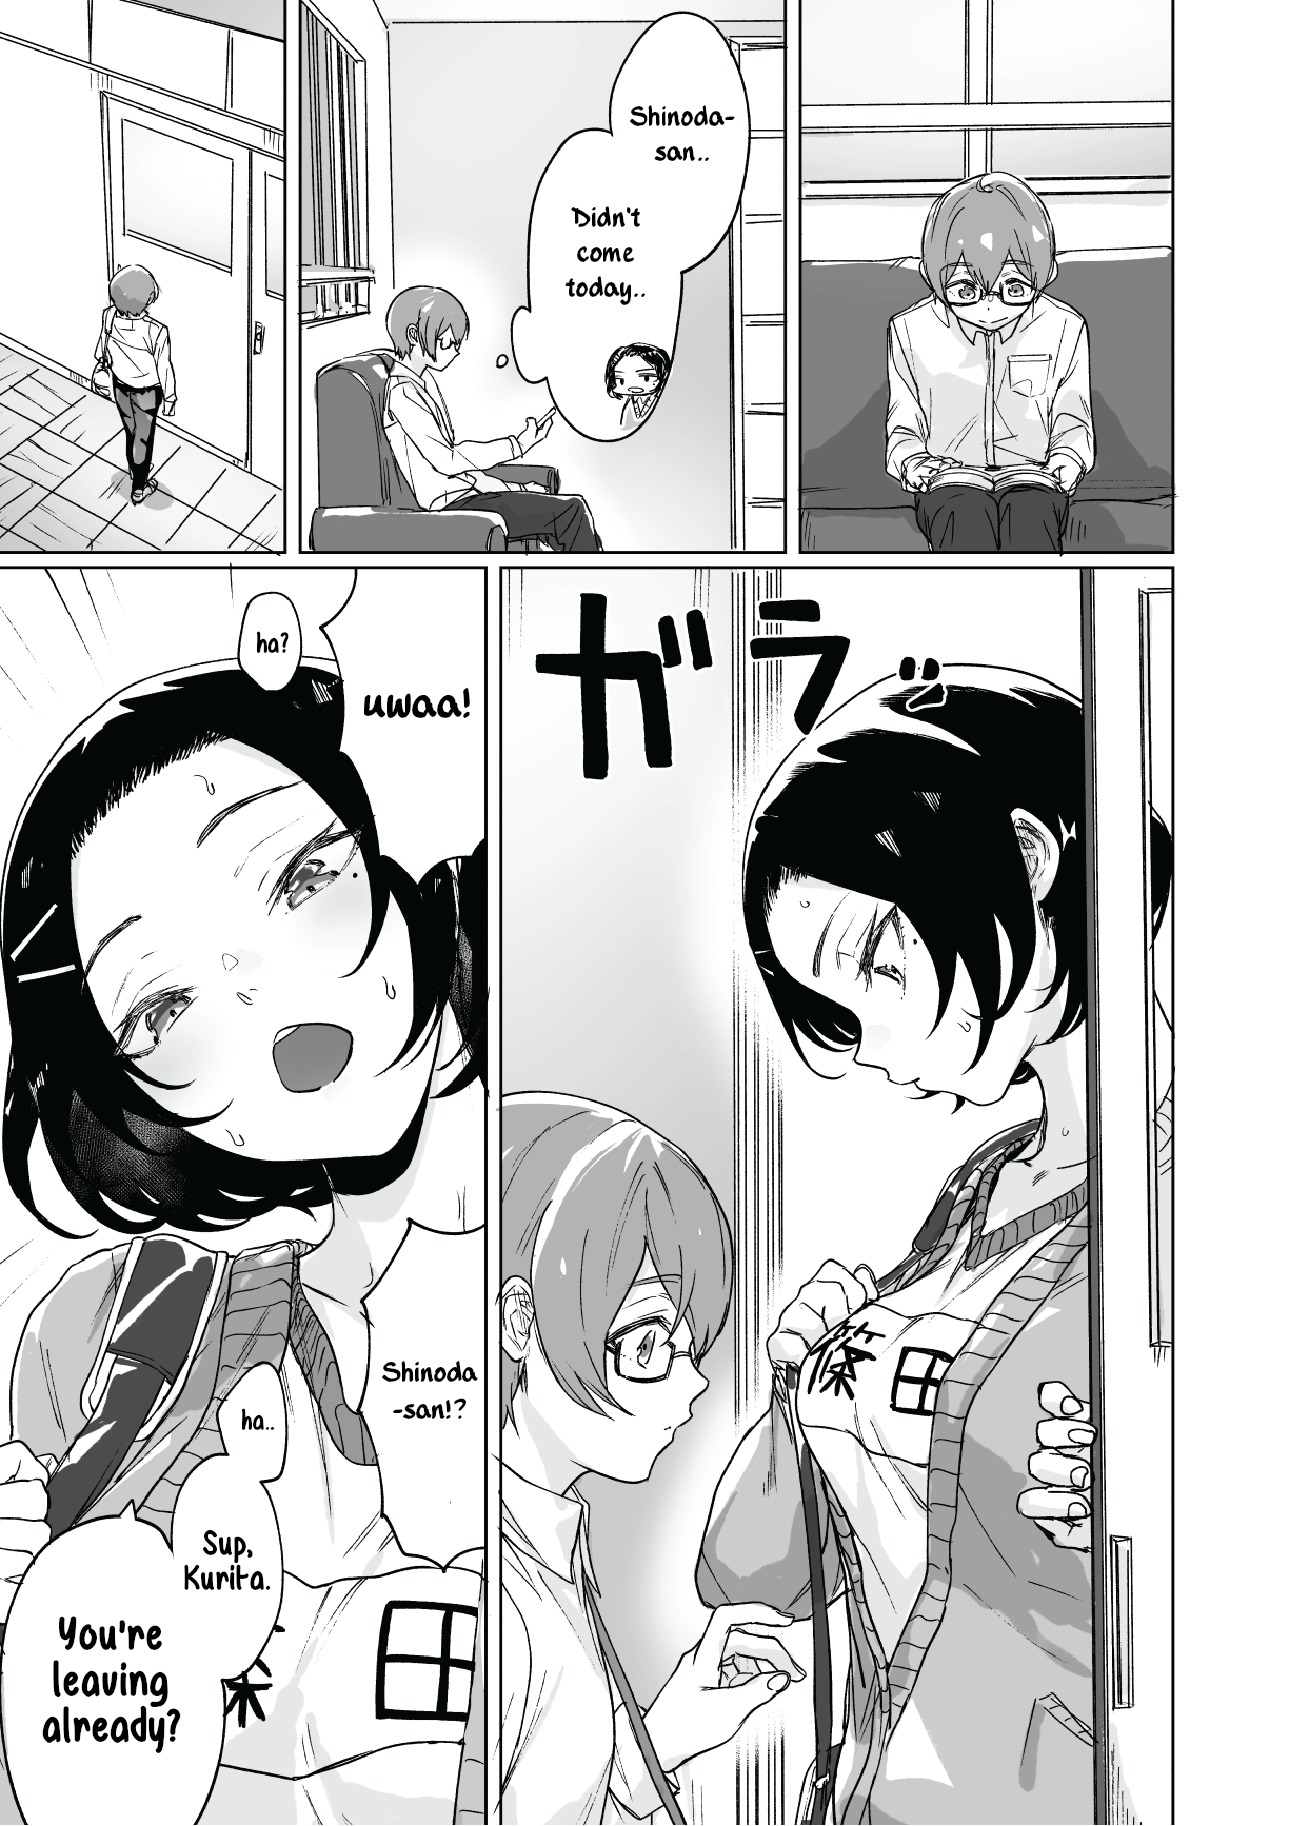 At first glance, Shinoda-san seems cool but is actually adorable! vol.1 ch.4